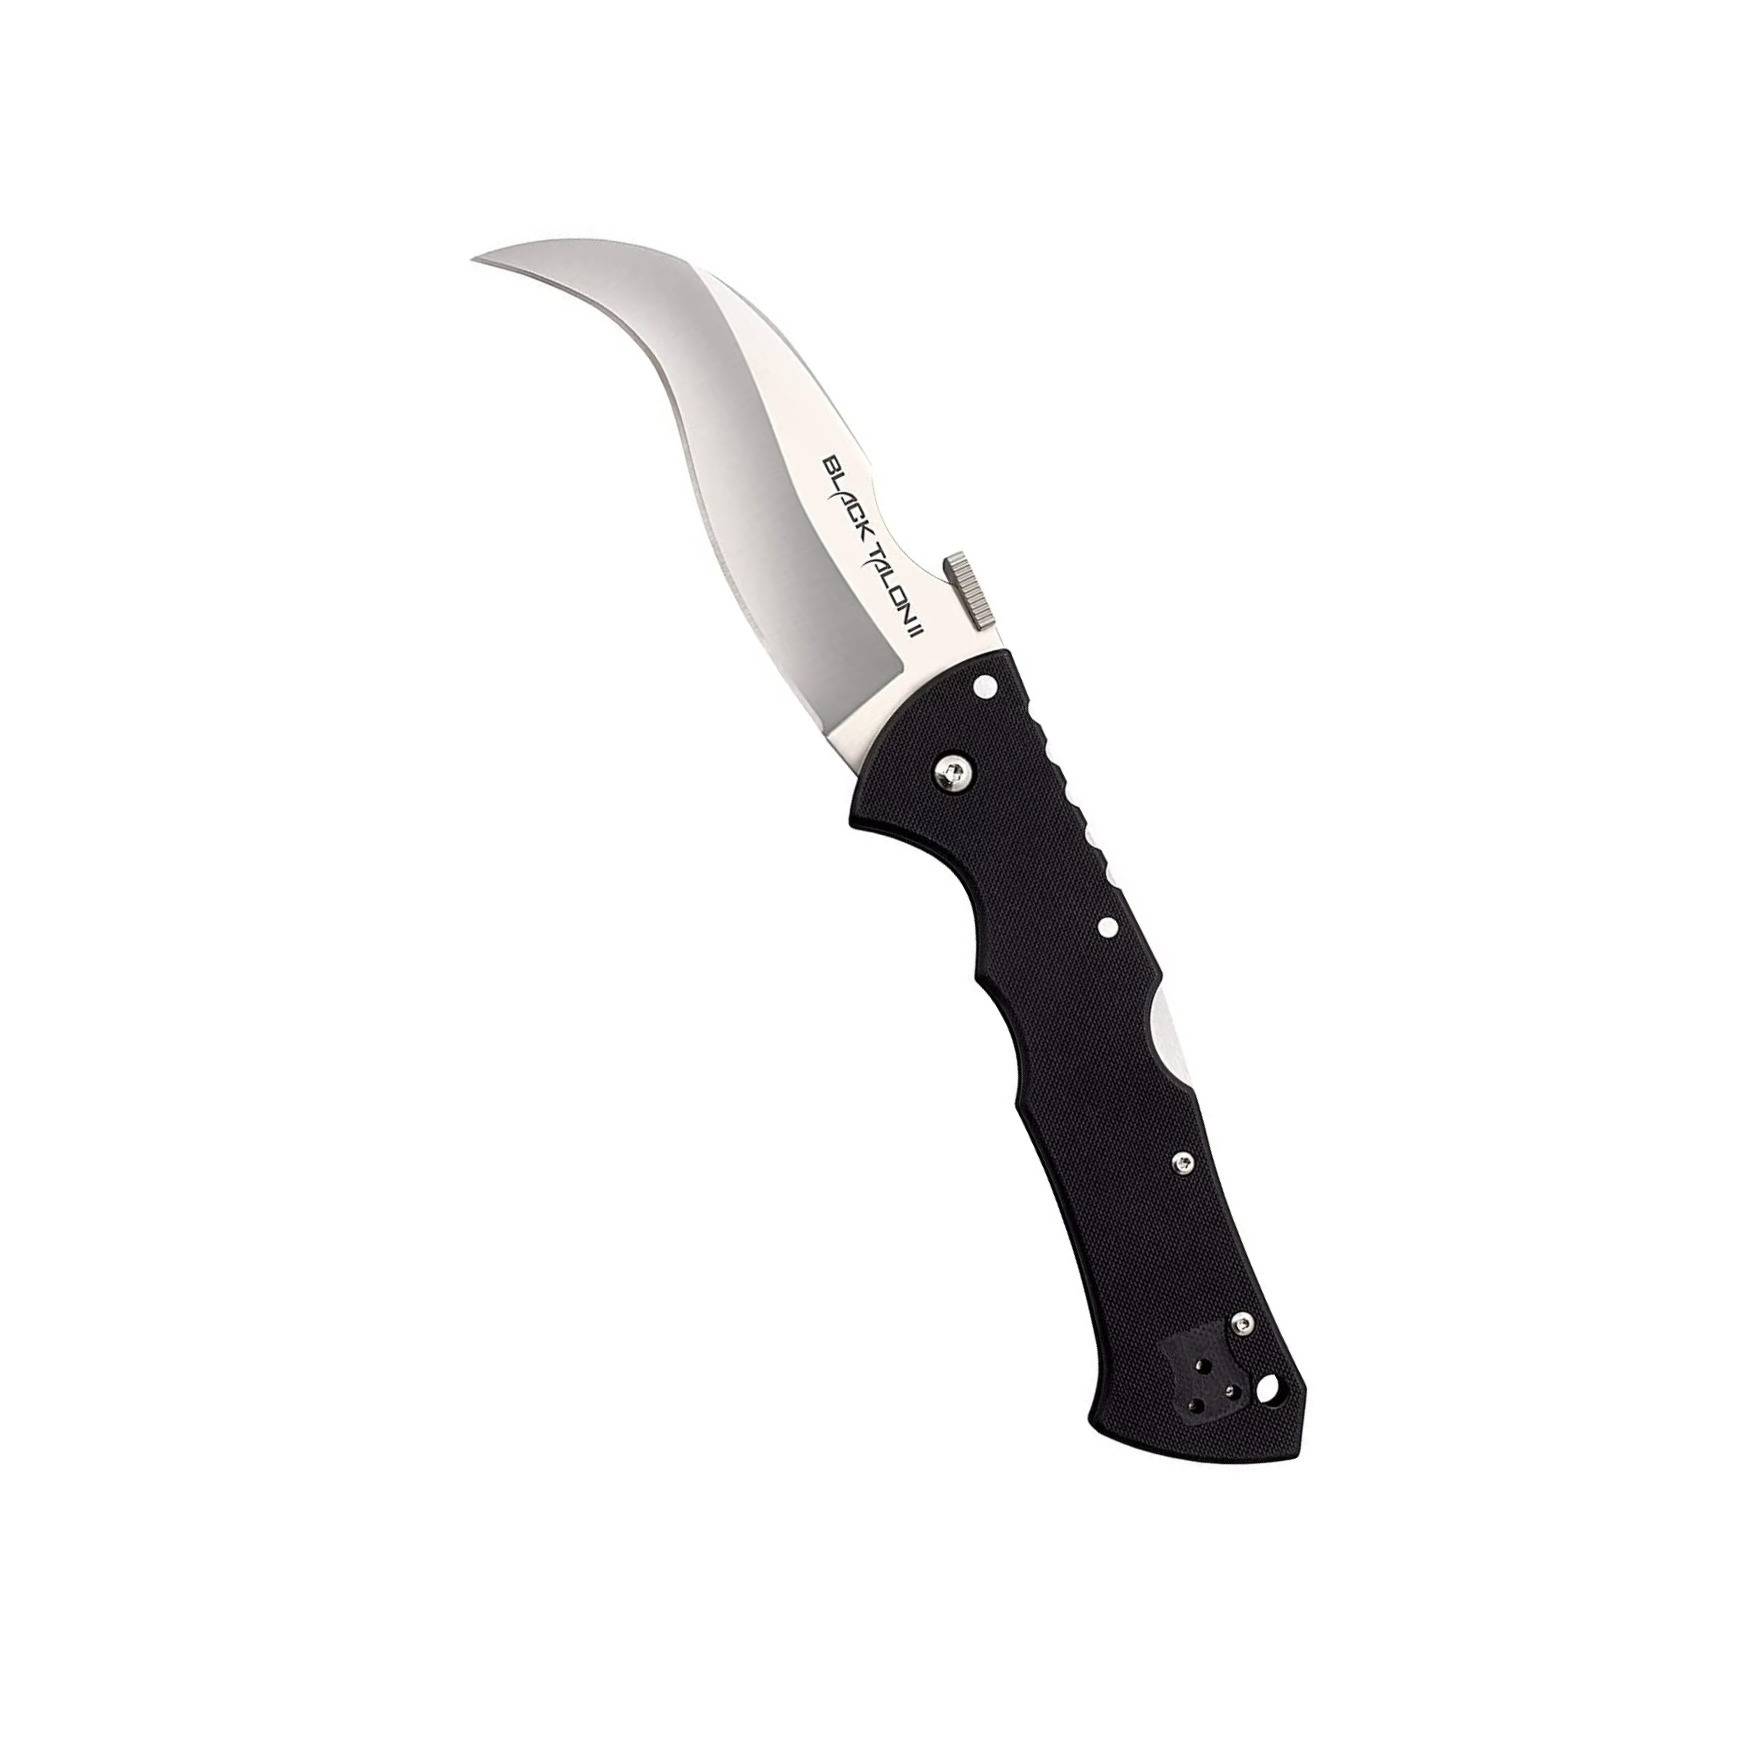 Cold Steel Black Talon ll 4-Inch S35VN Stainless Steel Blade Good Grip G-10 Handle Folding Knife